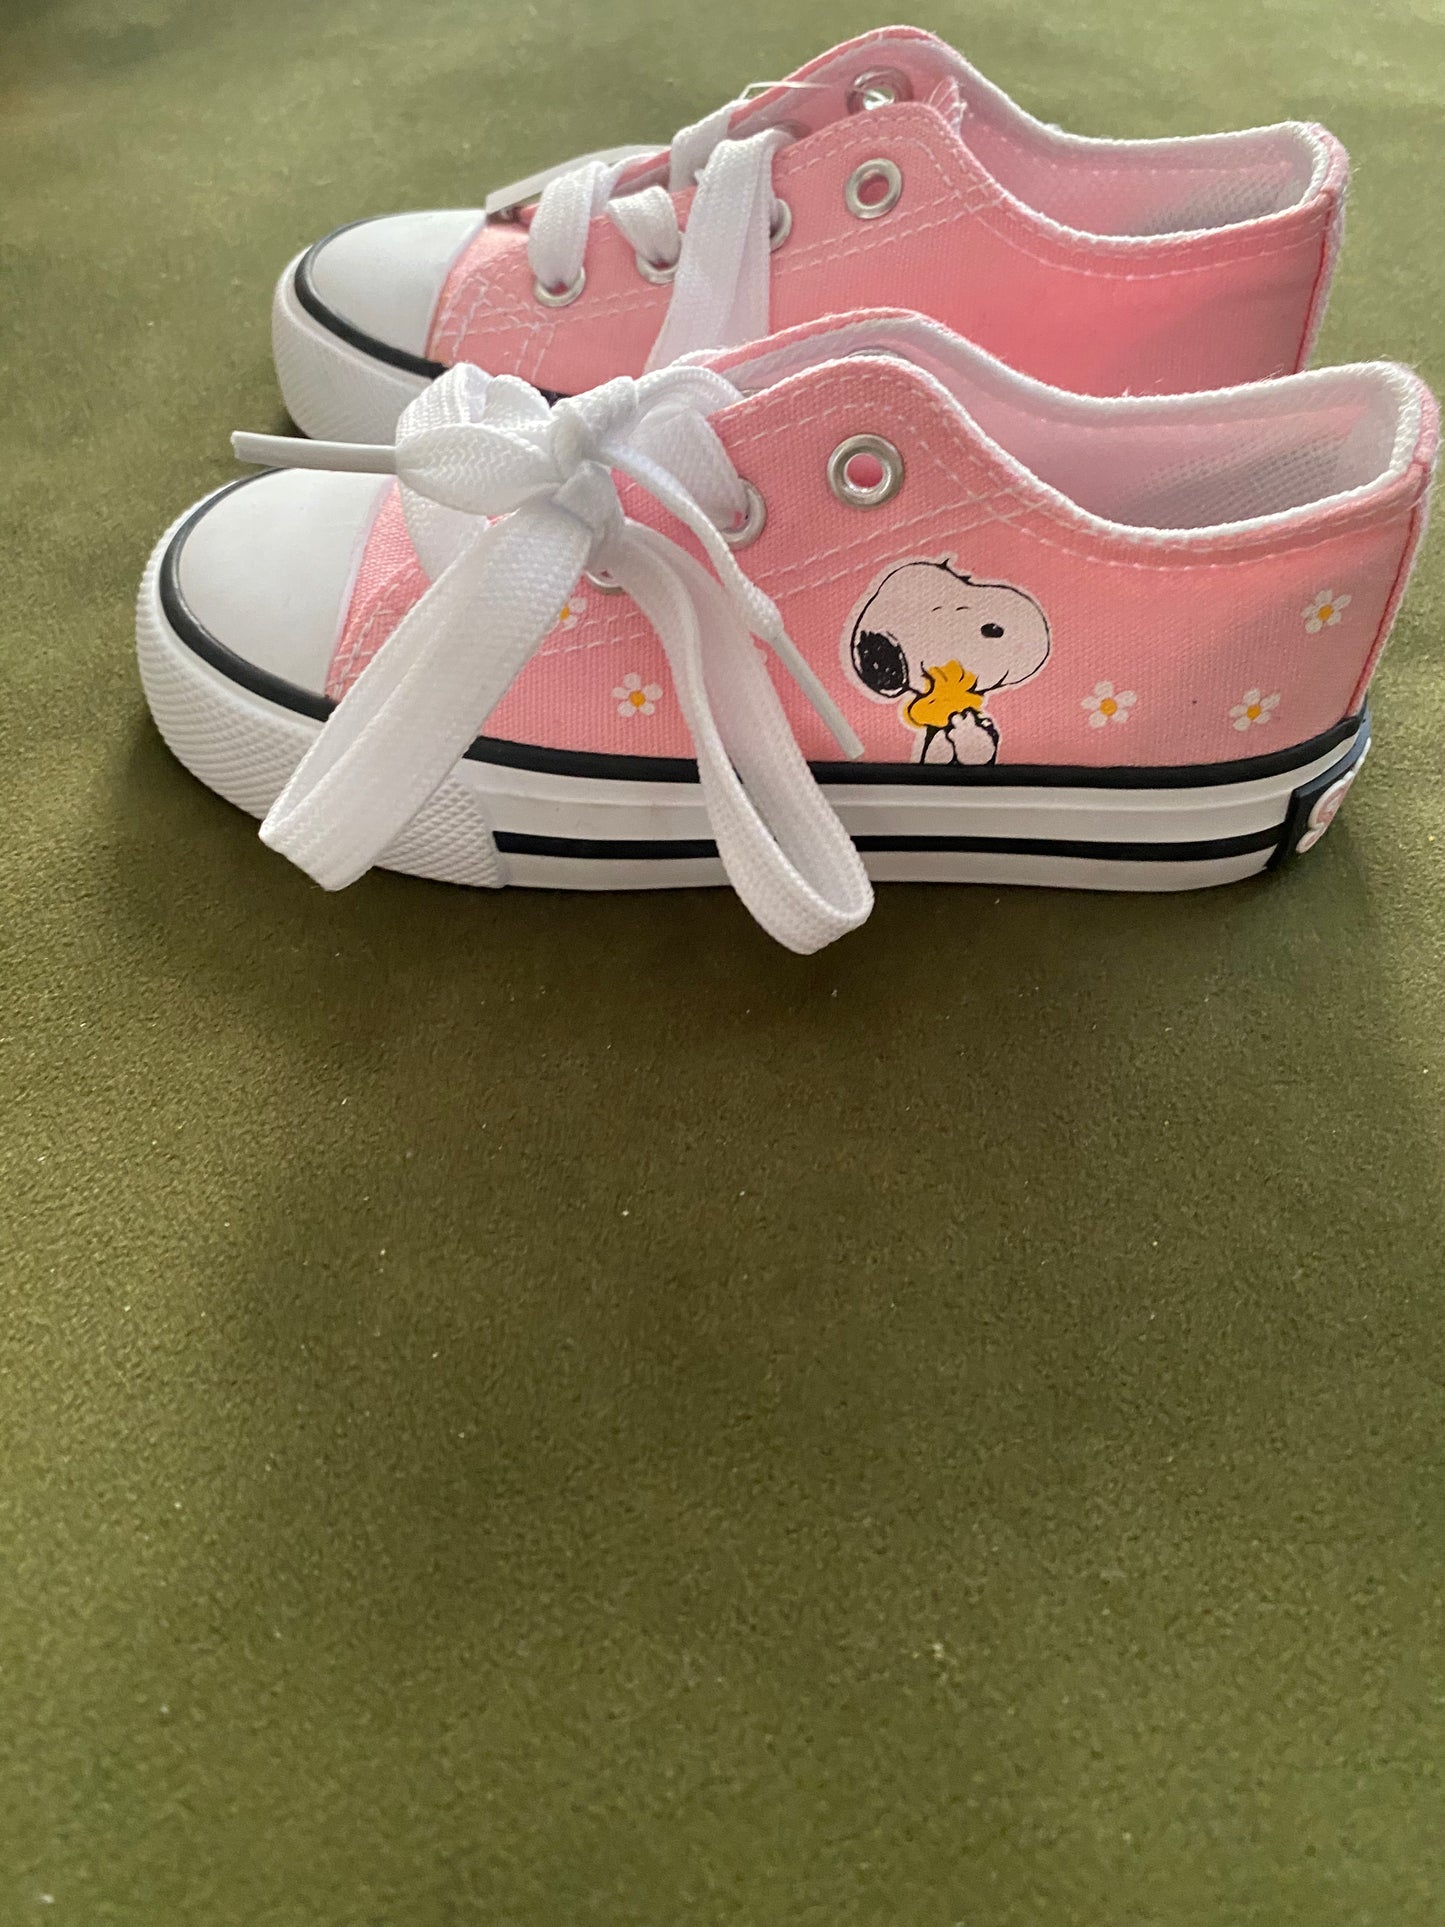 *reduced* NWT Size 7 Girls Snoopy Shoes